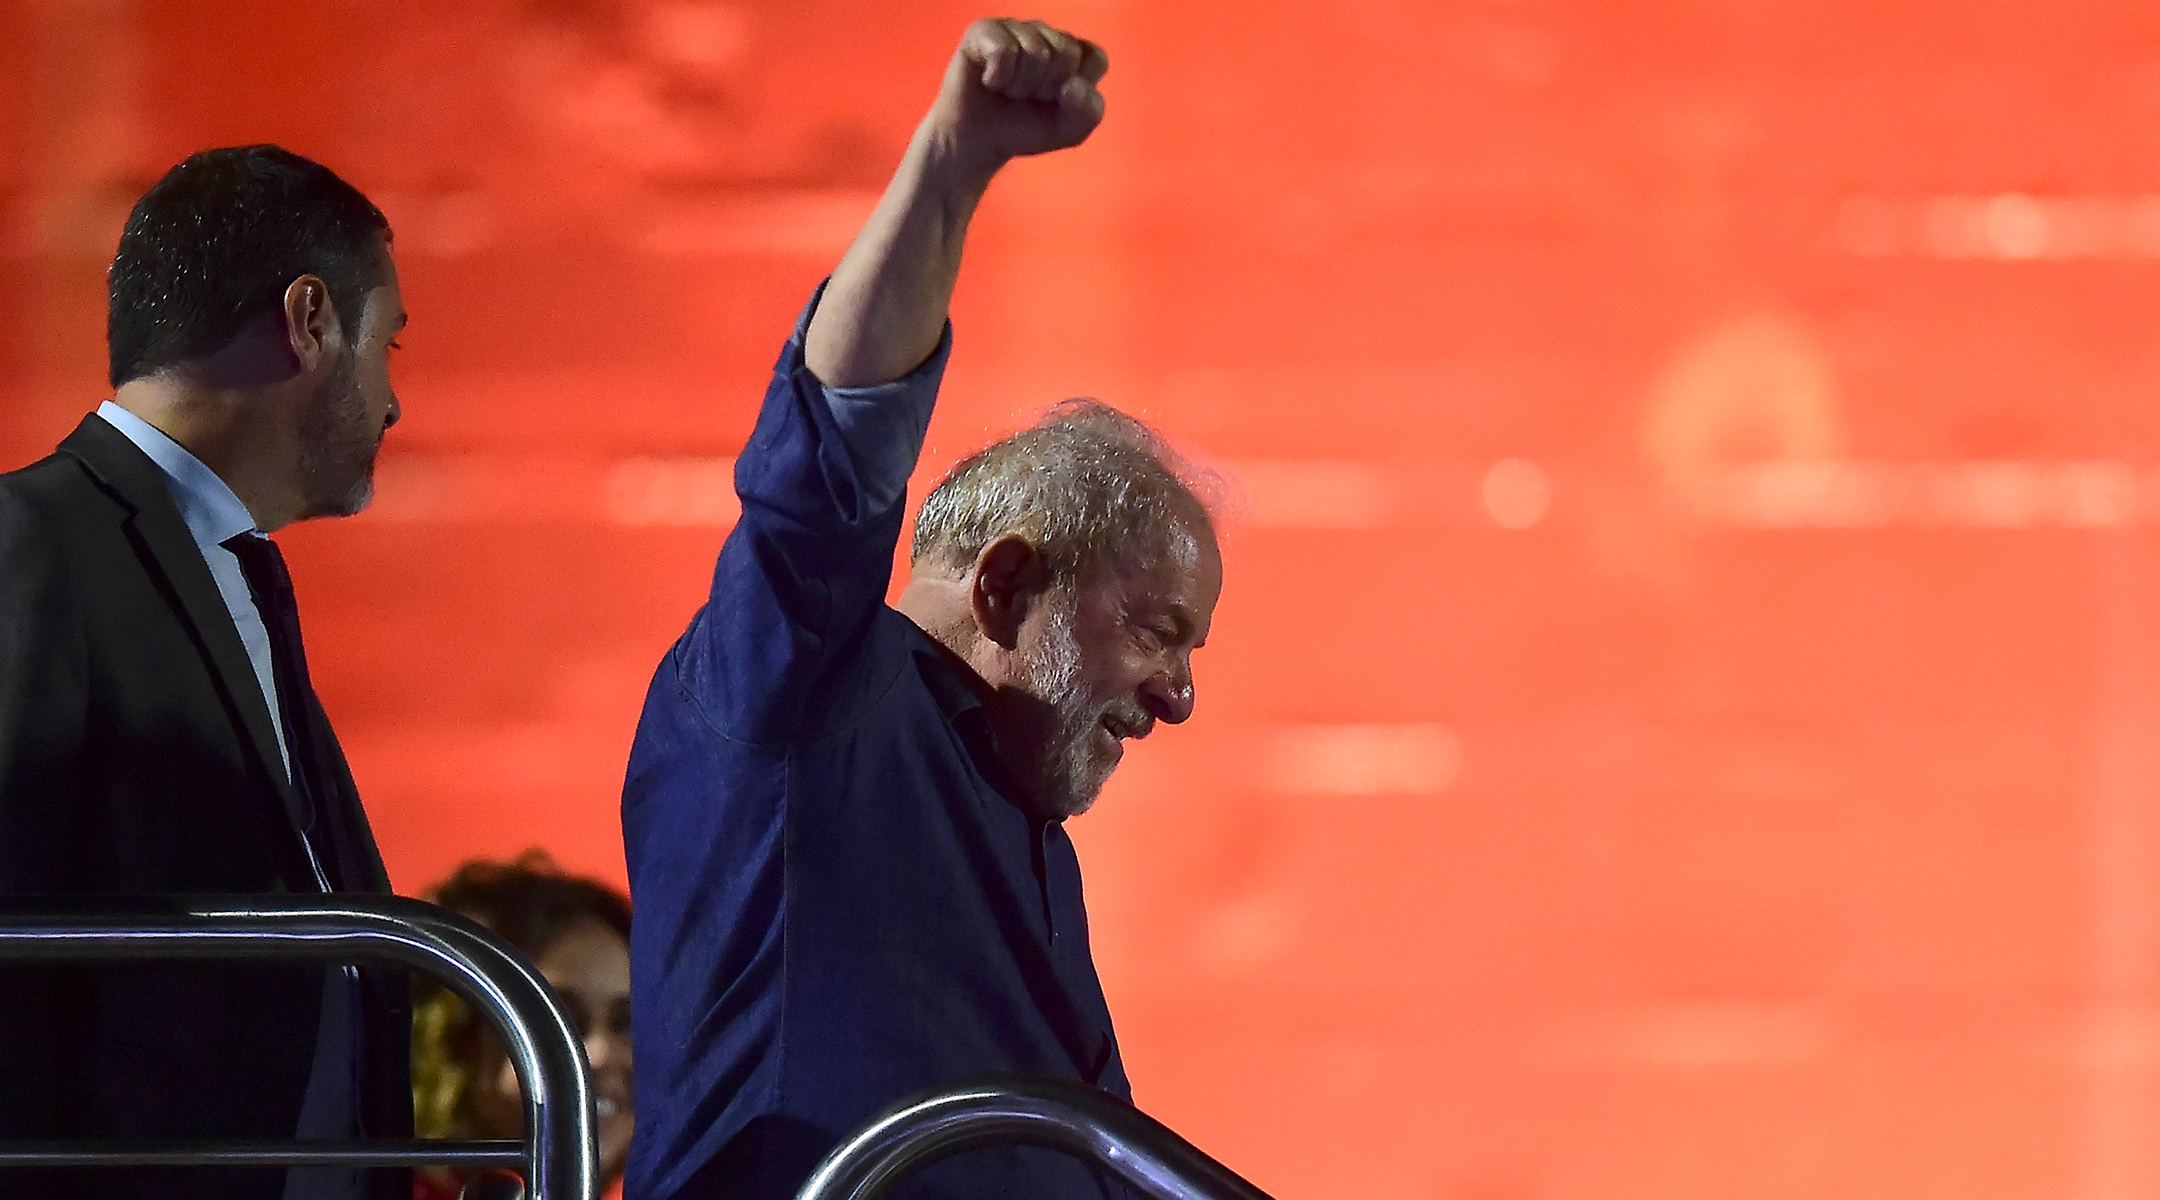 Luiz Inácio Lula Da Silva waves to supporters after being elected president of Brazil over incumbent Jair Bolsonaro by a thin margin in Sao Paulo, Oct. 30, 2022.